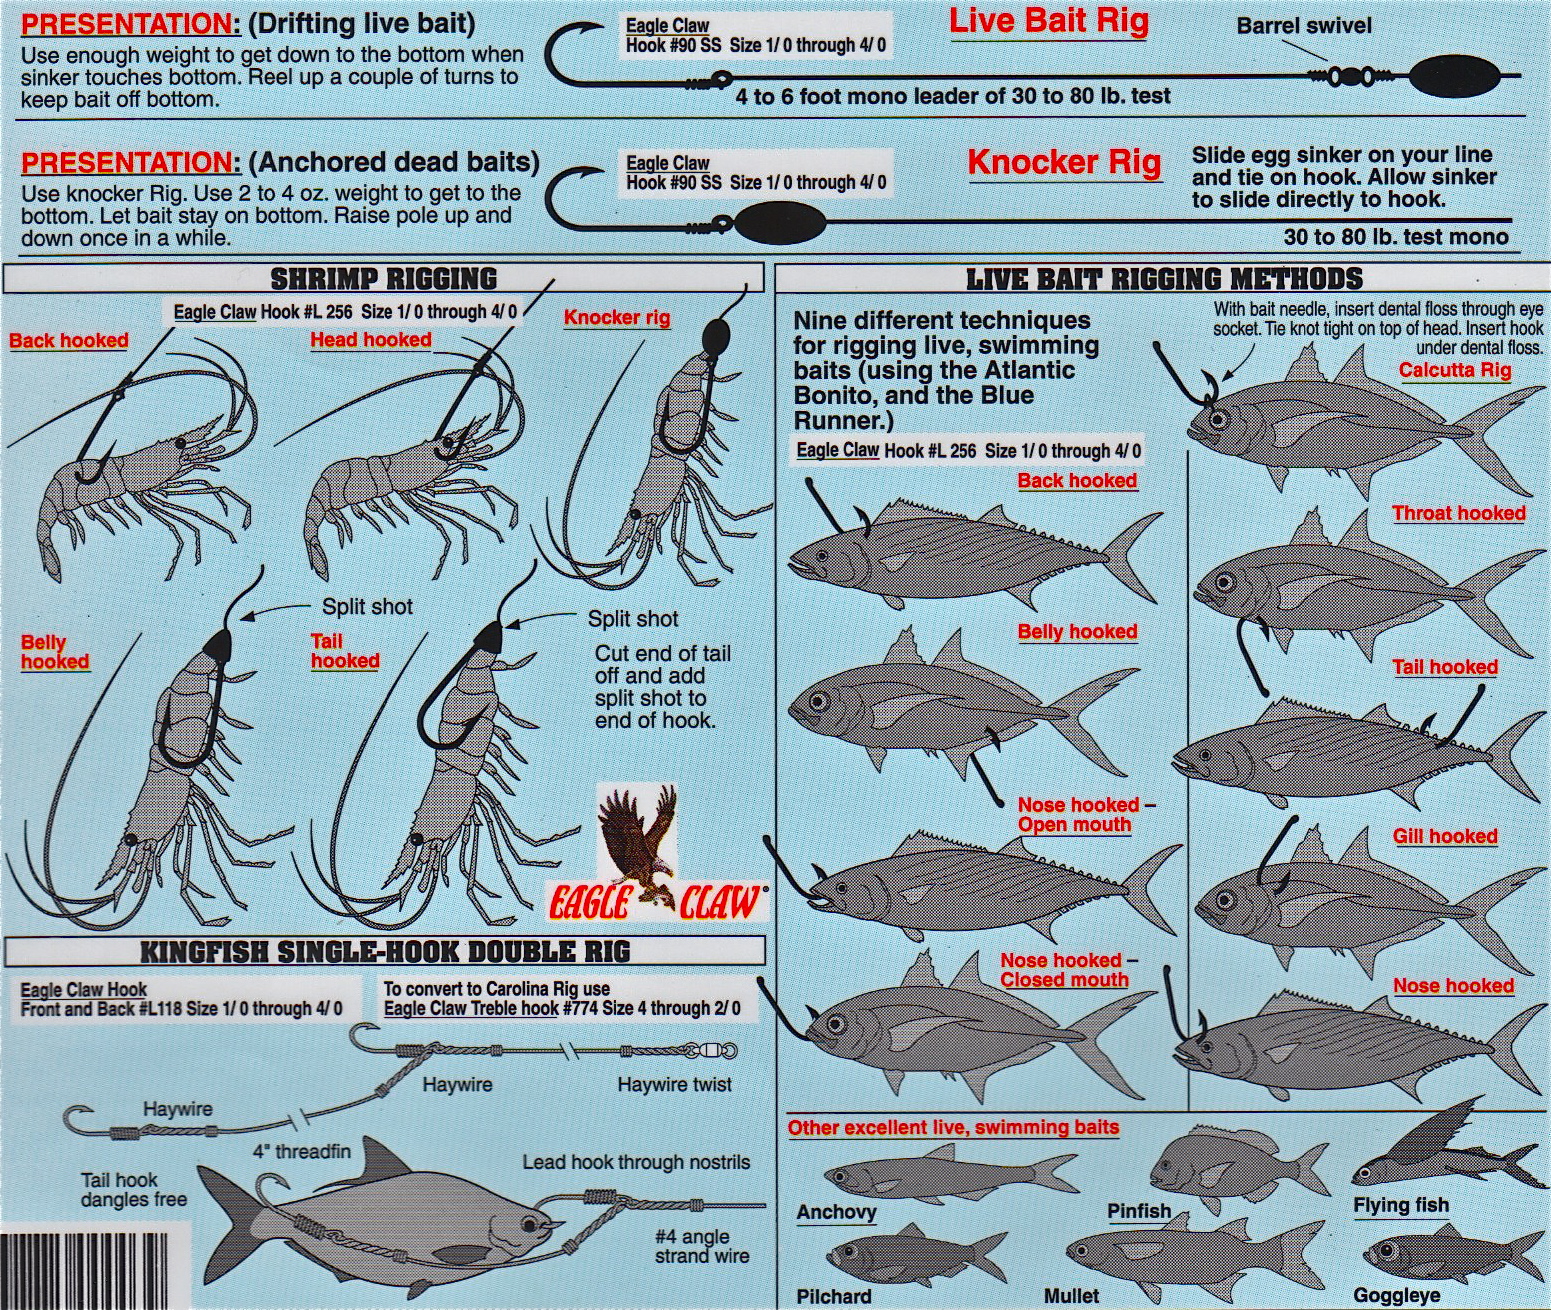 How to hook all types of baitfish